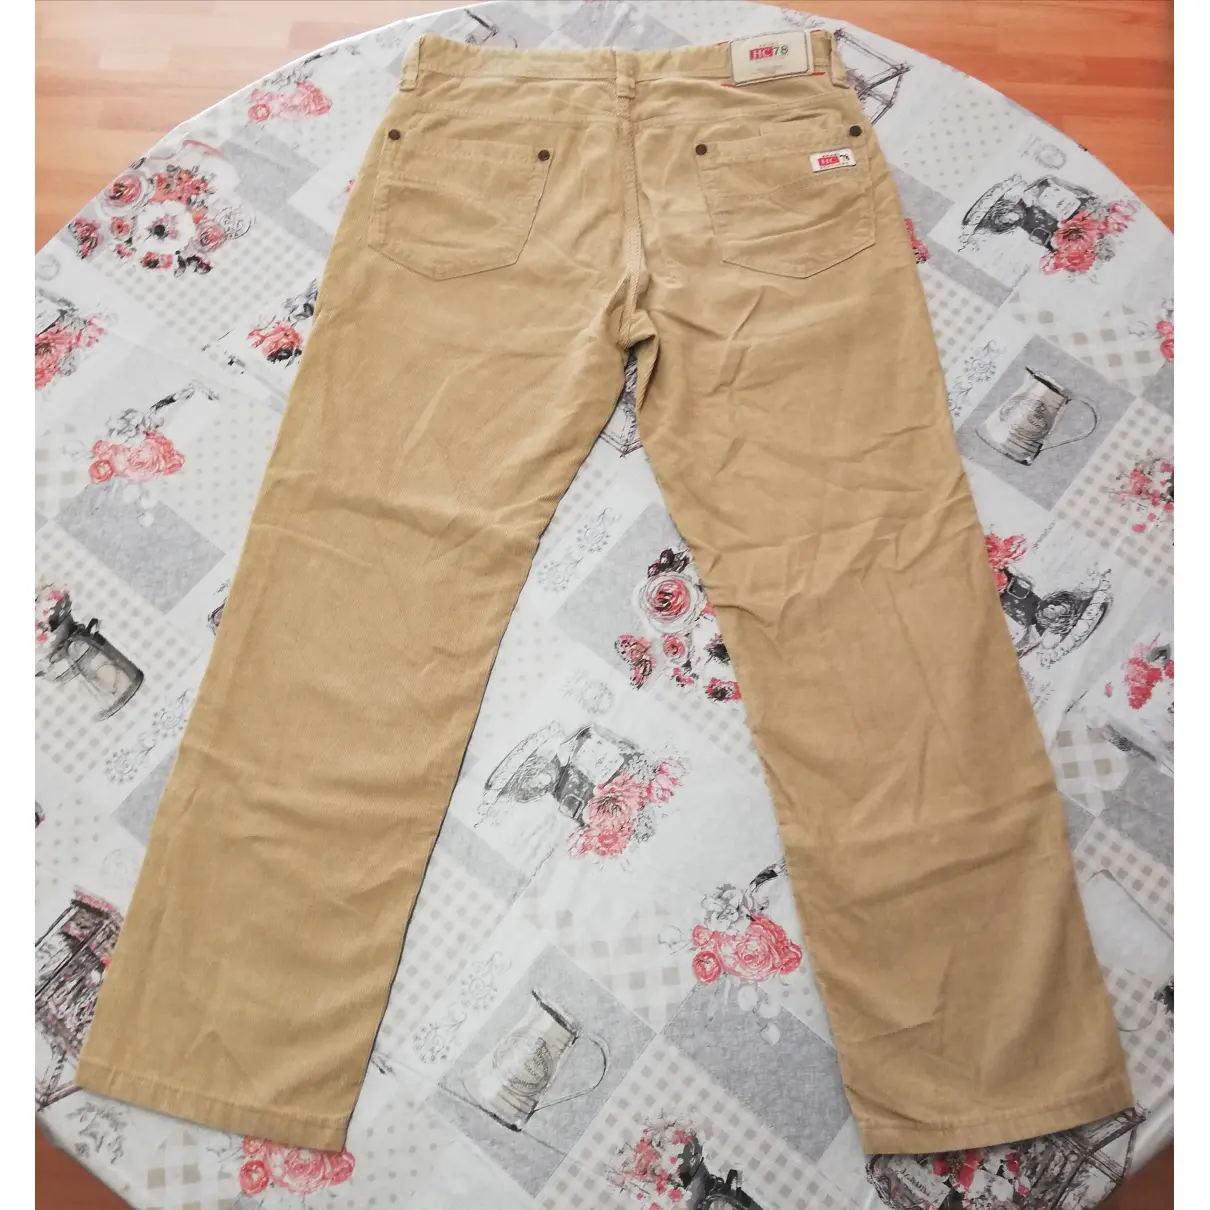 Buy Henry Cotton Trousers online - Vintage